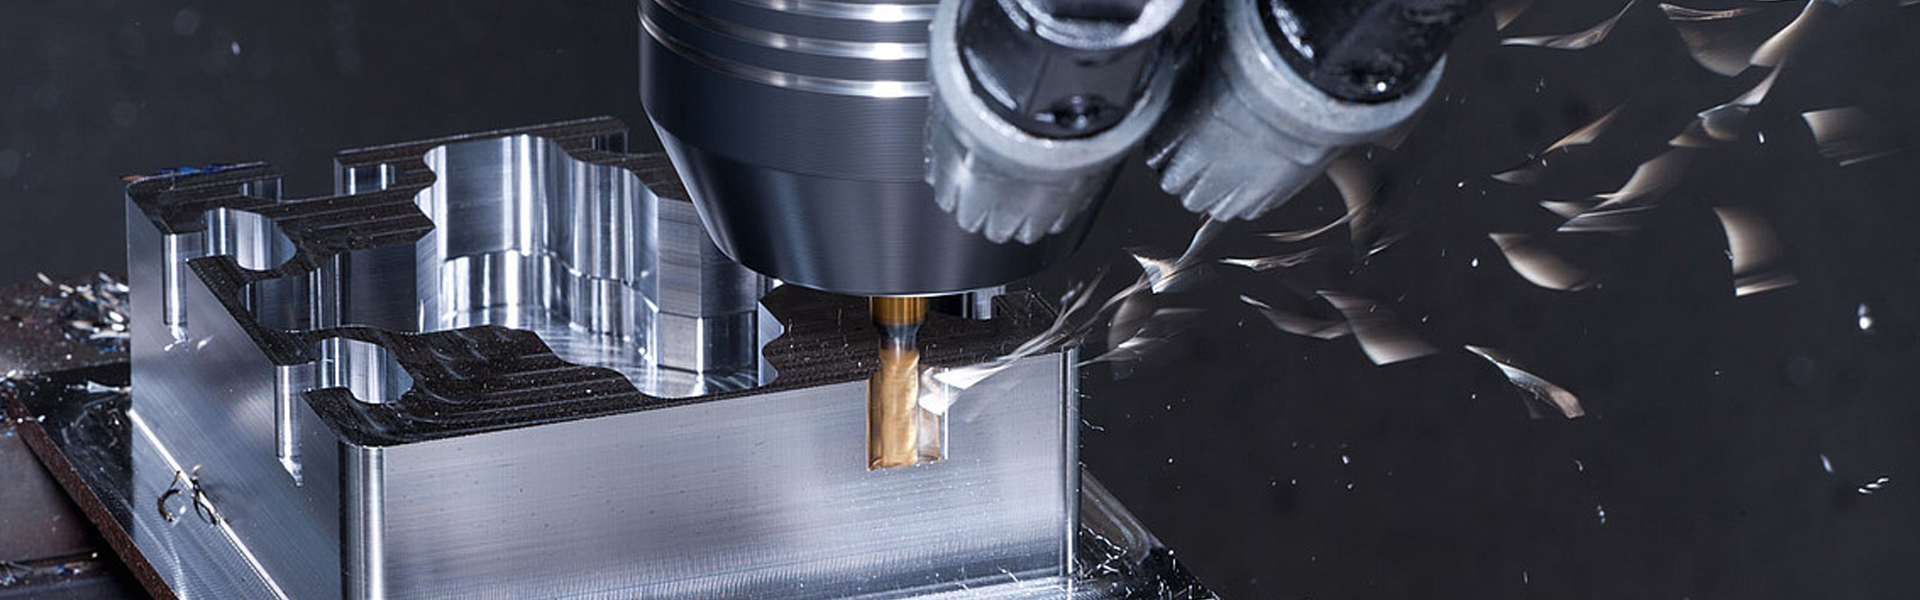 Top 7 Design Tips for CNC Machining Parts